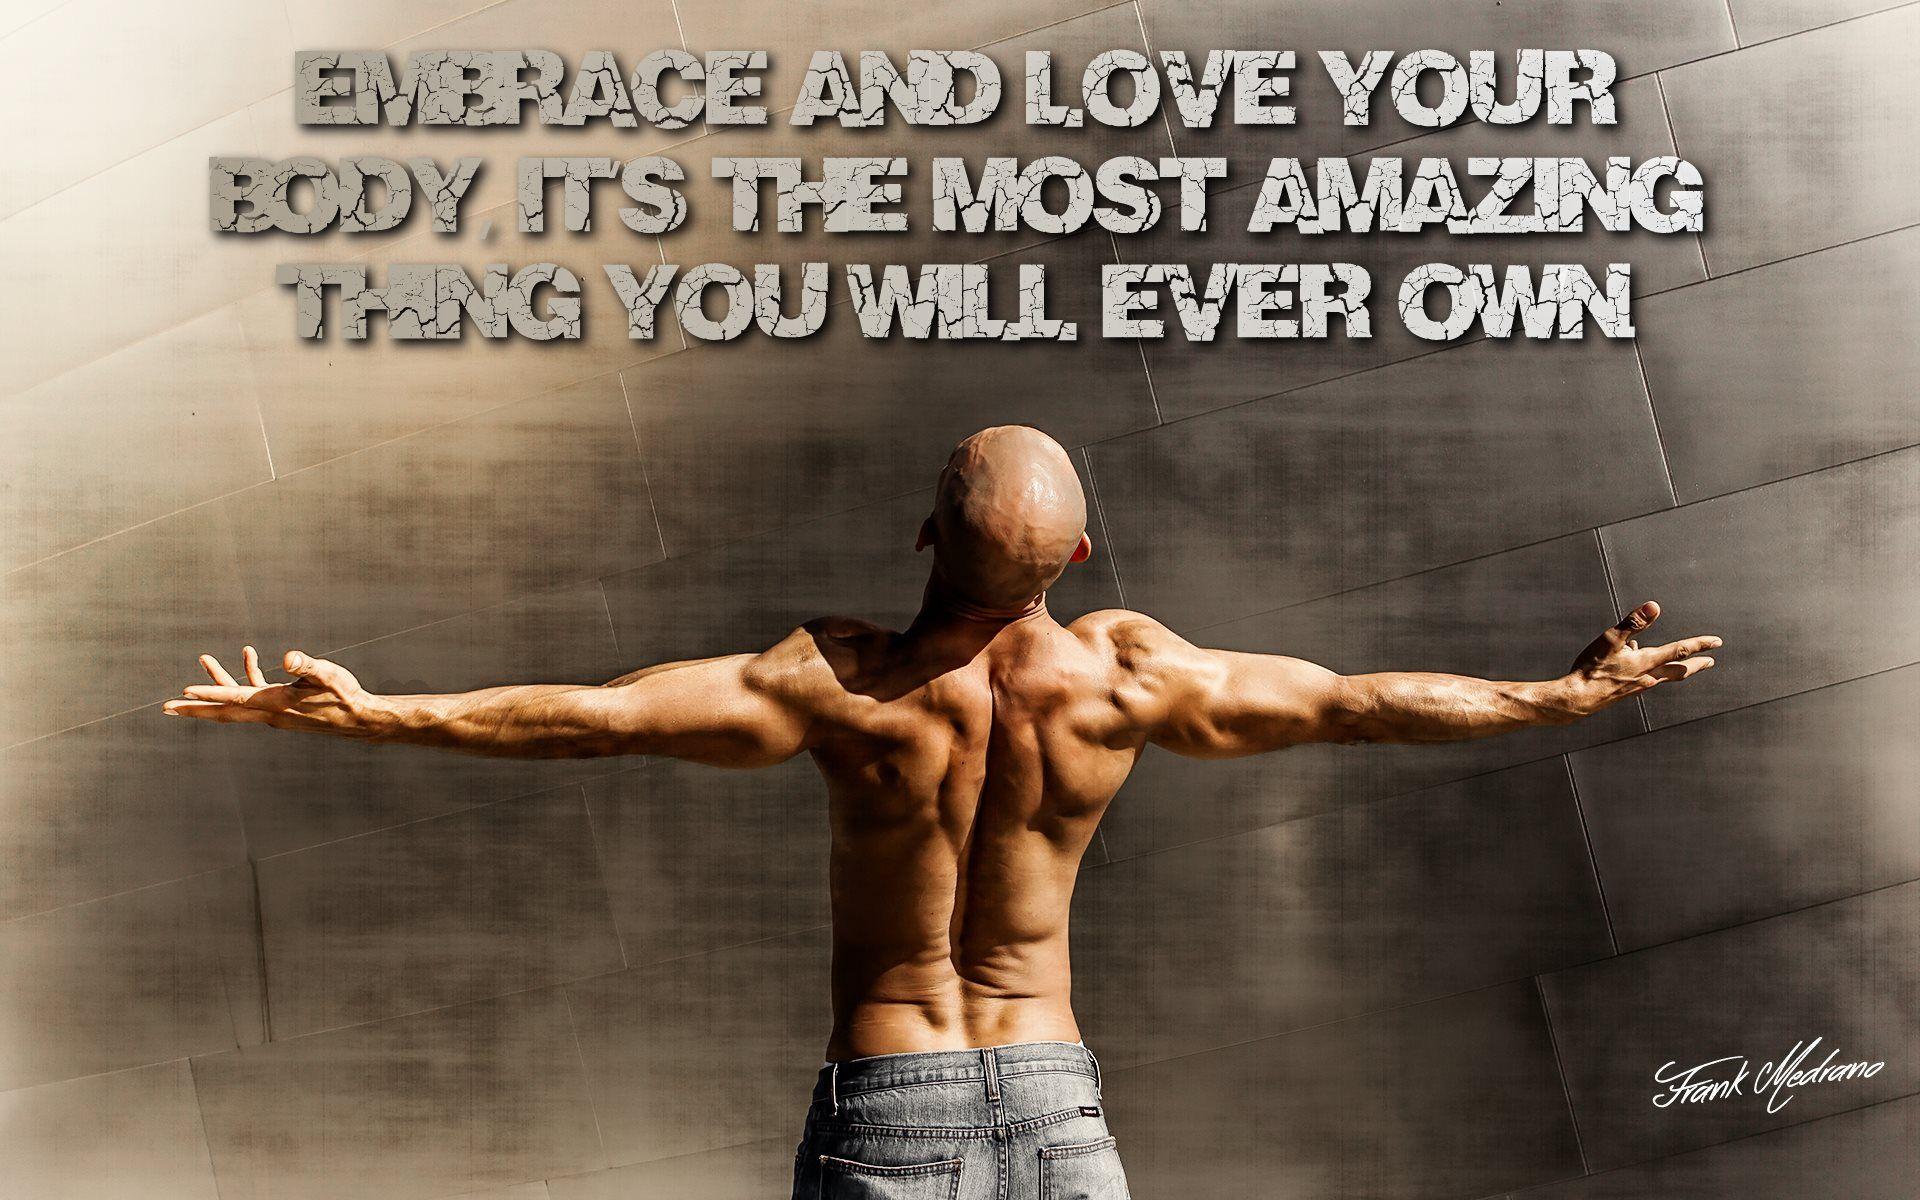 Embrace & love your body